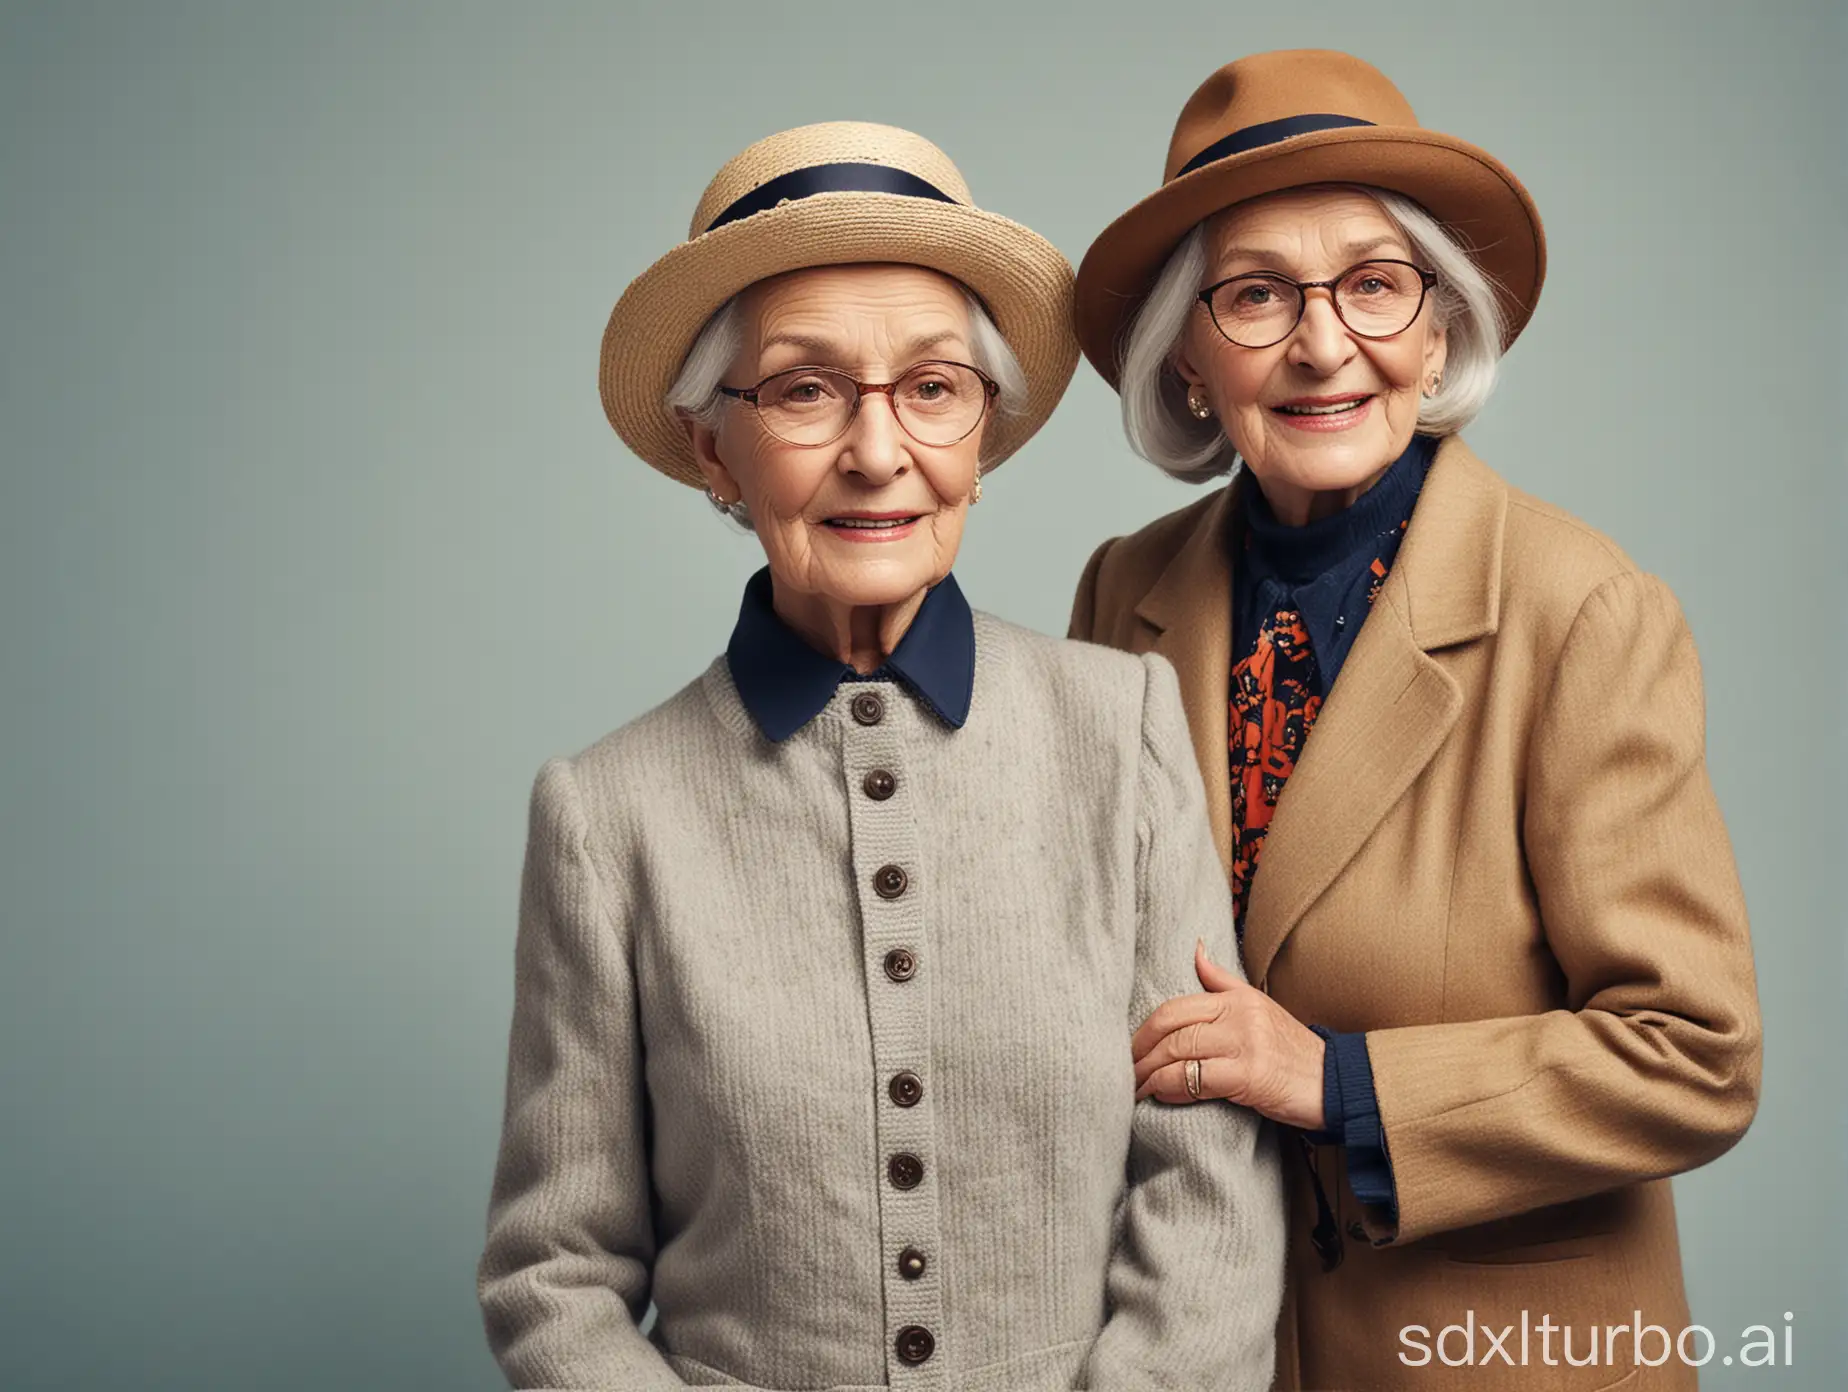 Generate an advertising image featuring a fashionable European and American elderly person wearing a hat